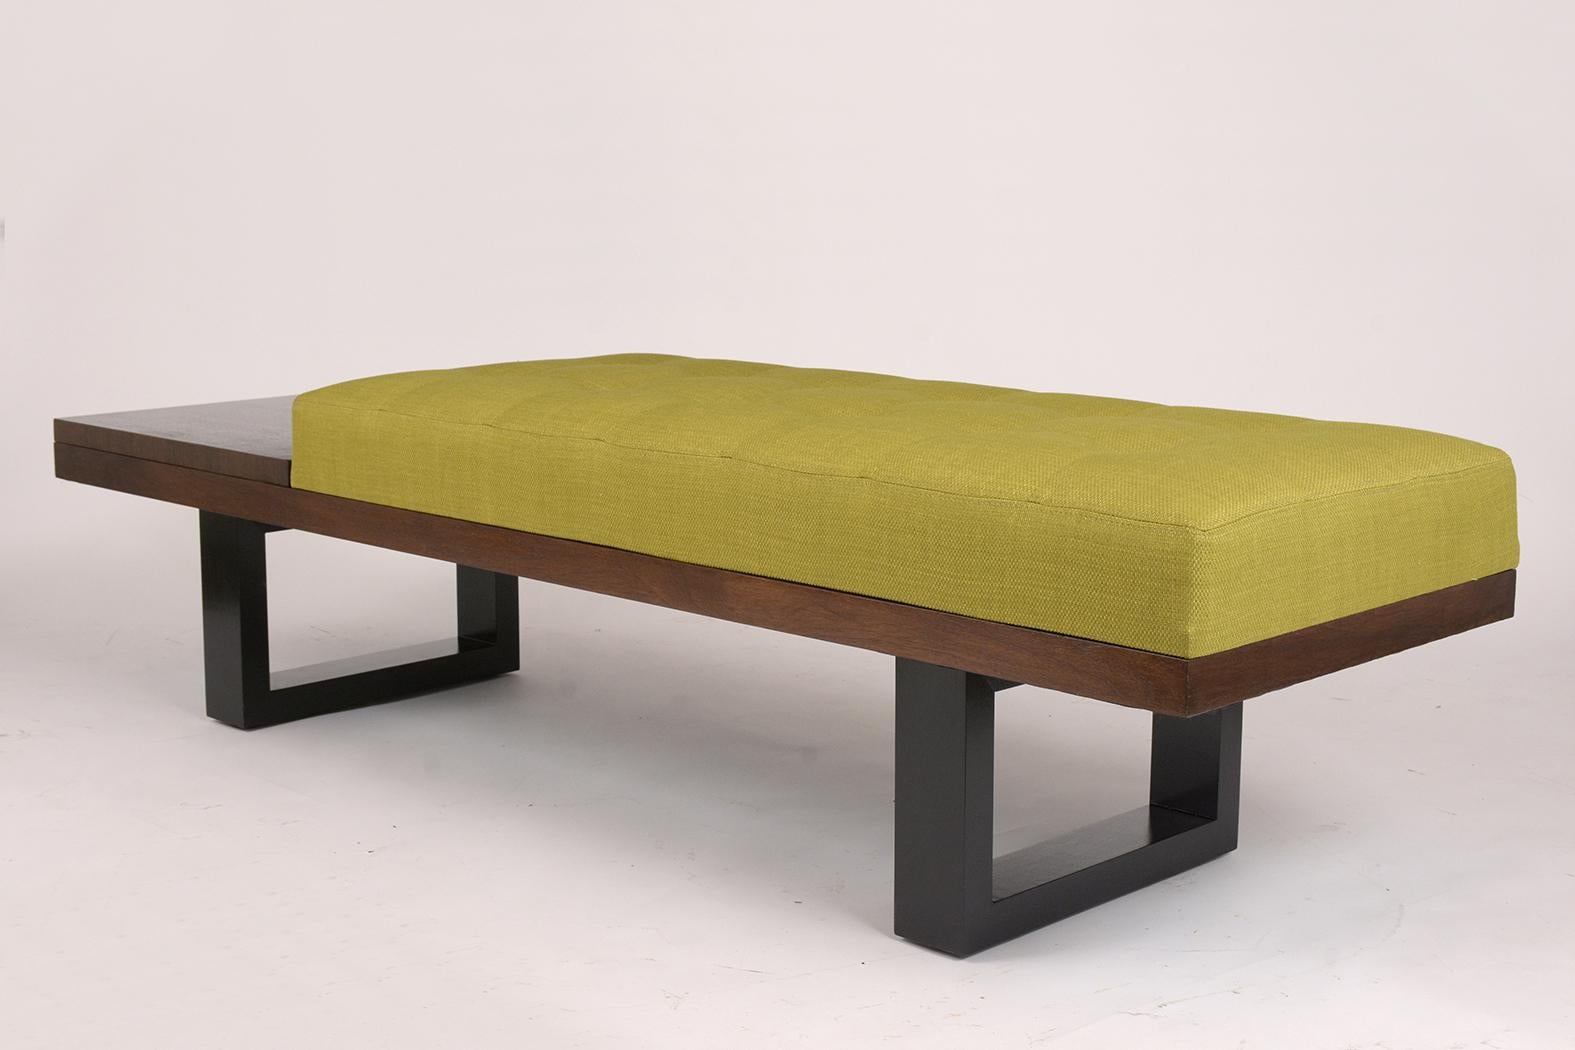 American Mid-Century Modern Tufted Bench with Side Table